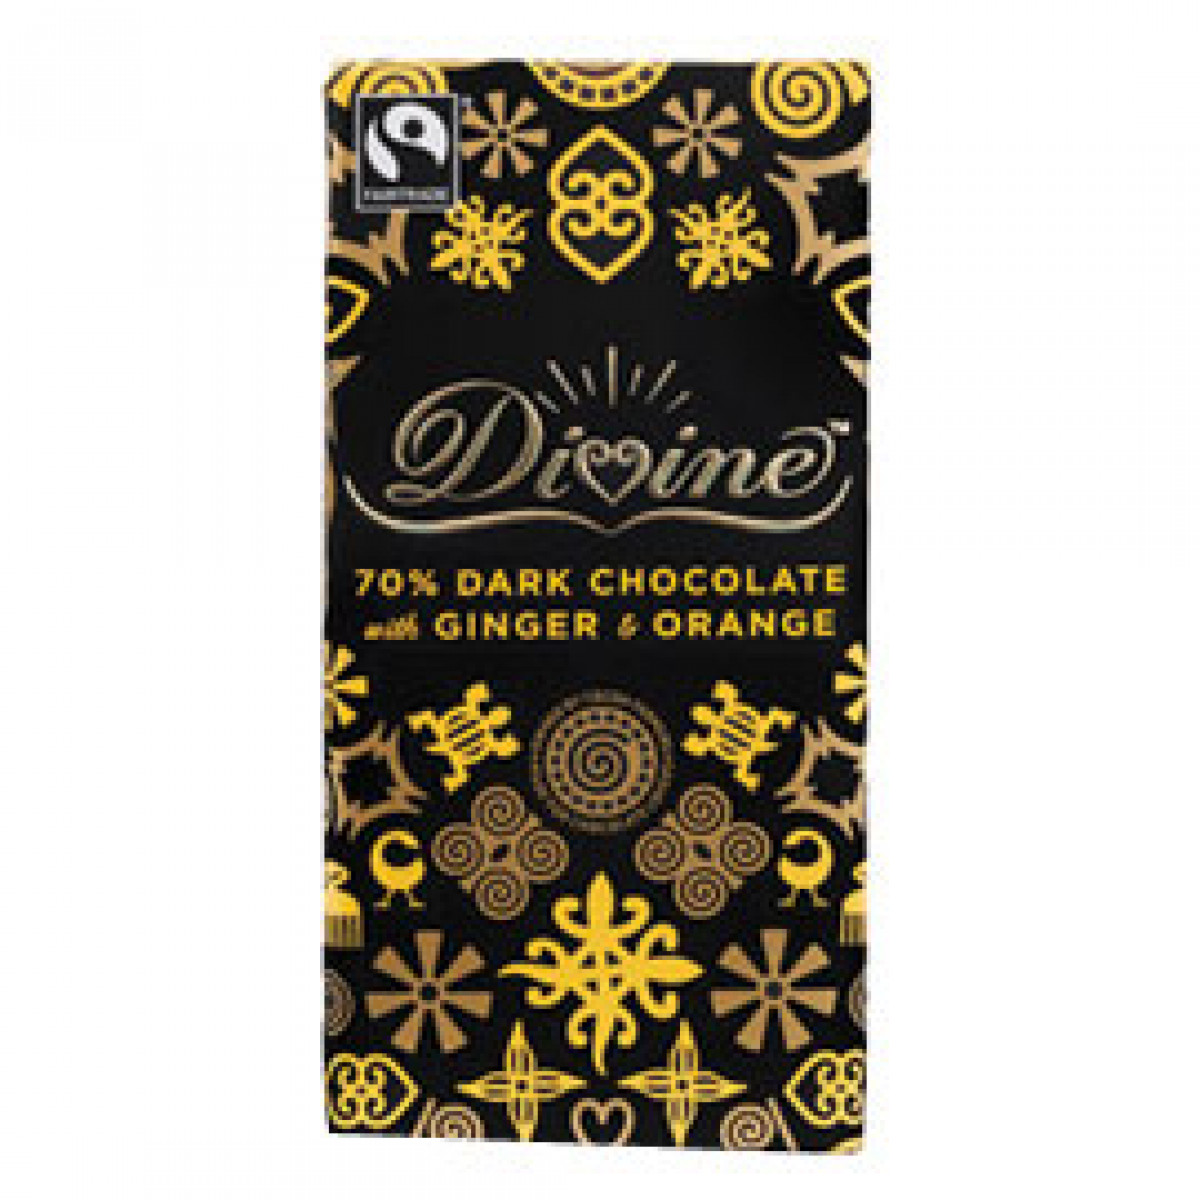 Product picture for Dark Chocolate 70% with Orange & Ginger